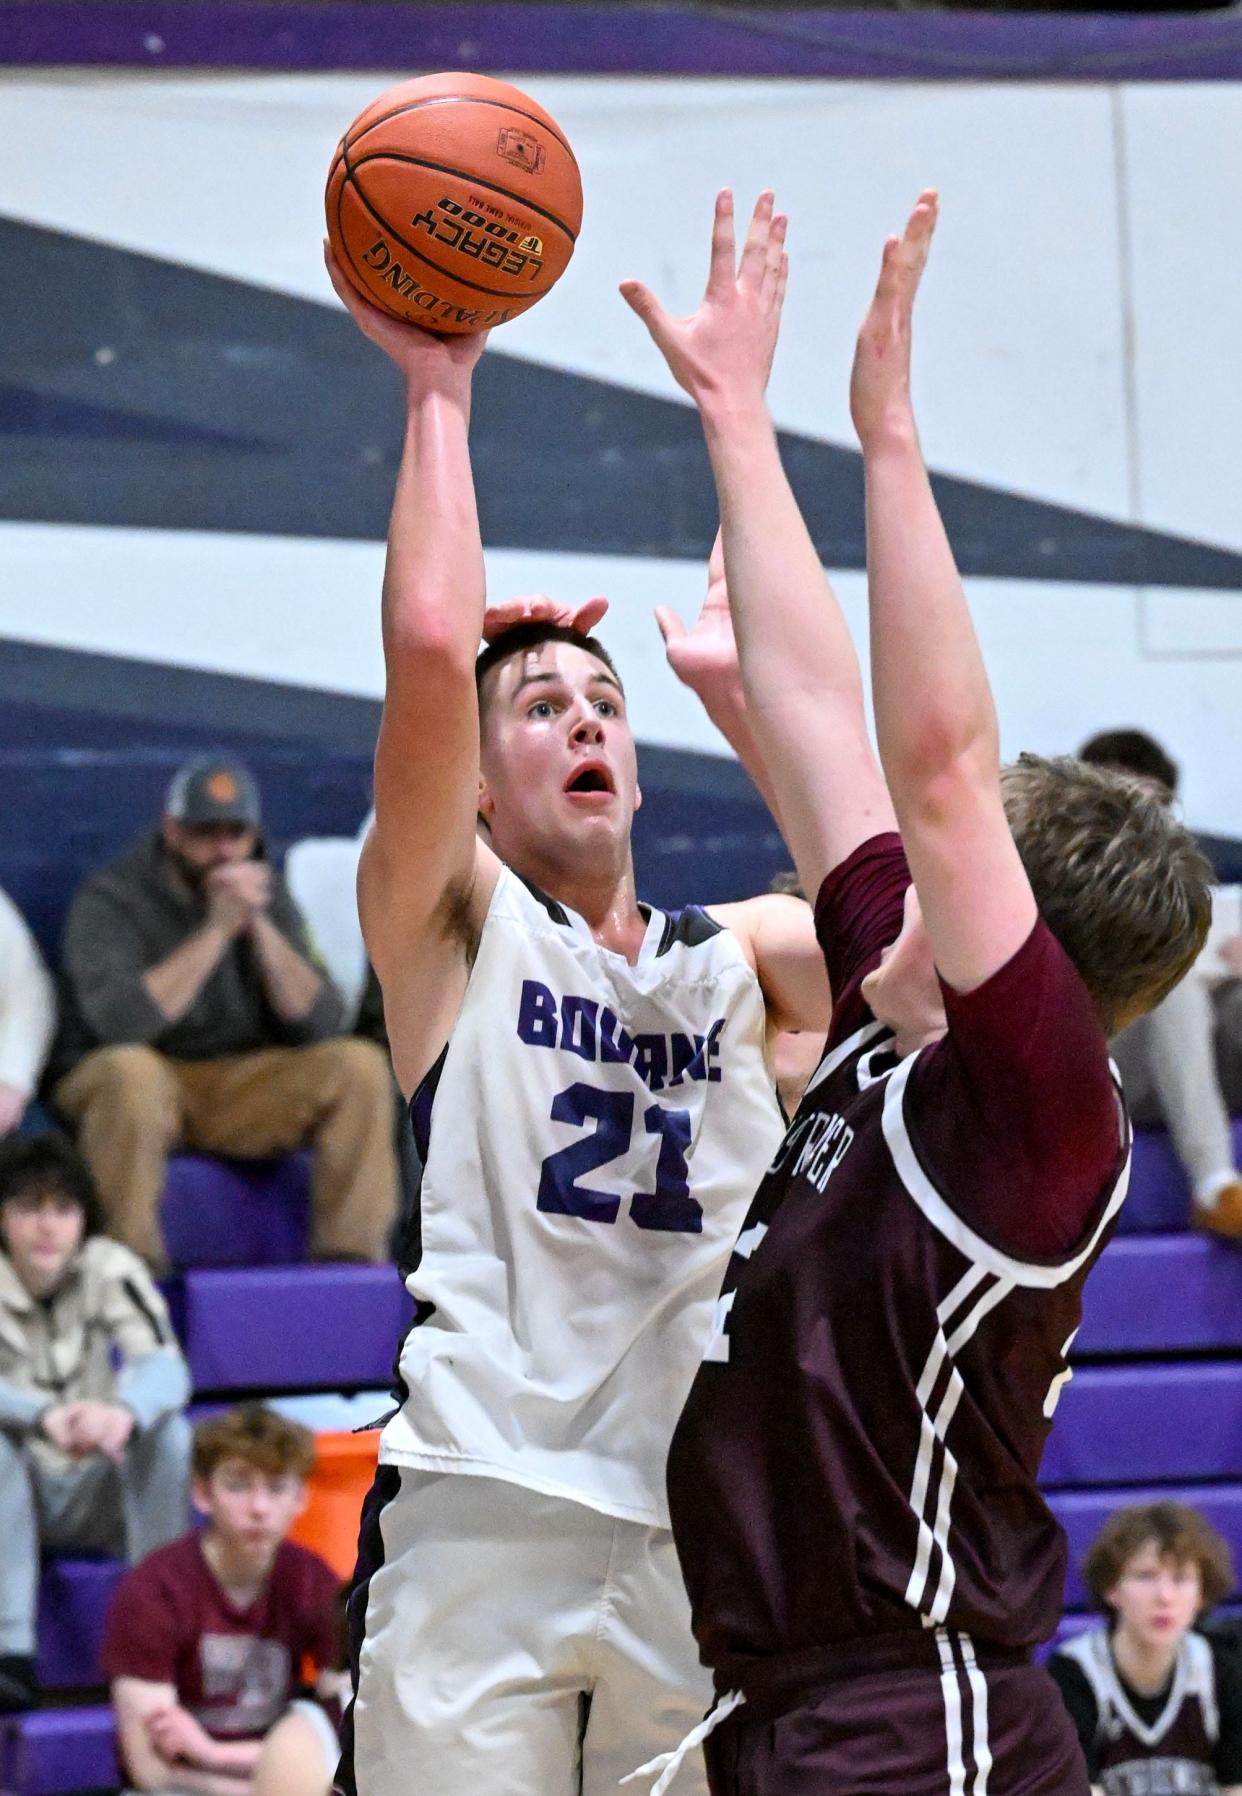 Mike Dankert of Bourne is fouled from behind as he shoots over Thomas Stapleton of West Bridgewater.